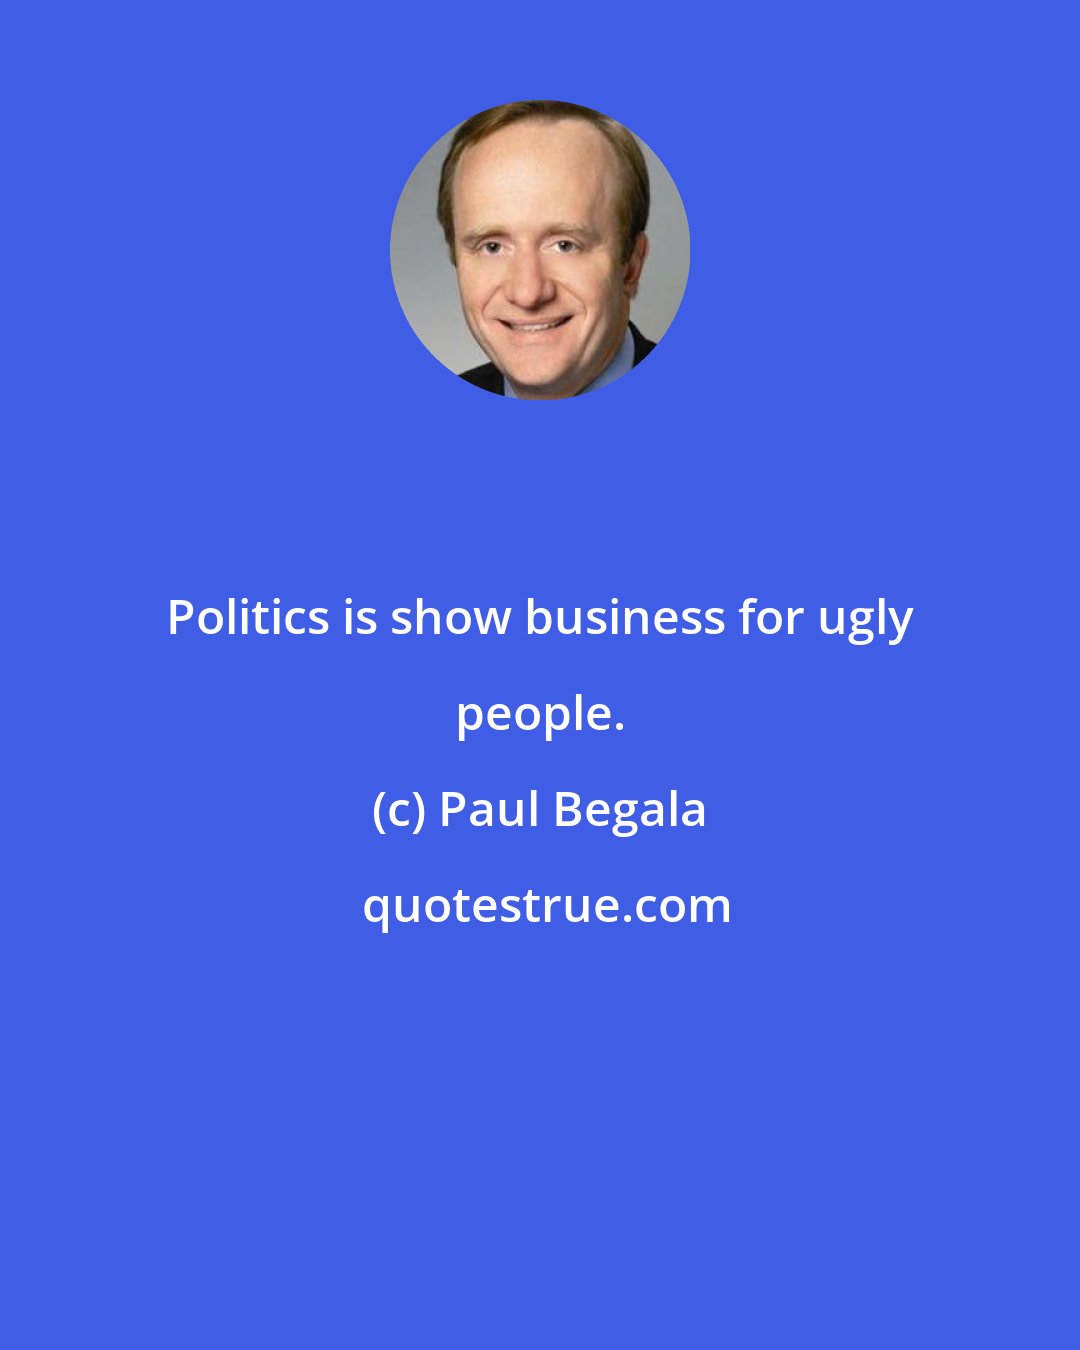 Paul Begala: Politics is show business for ugly people.